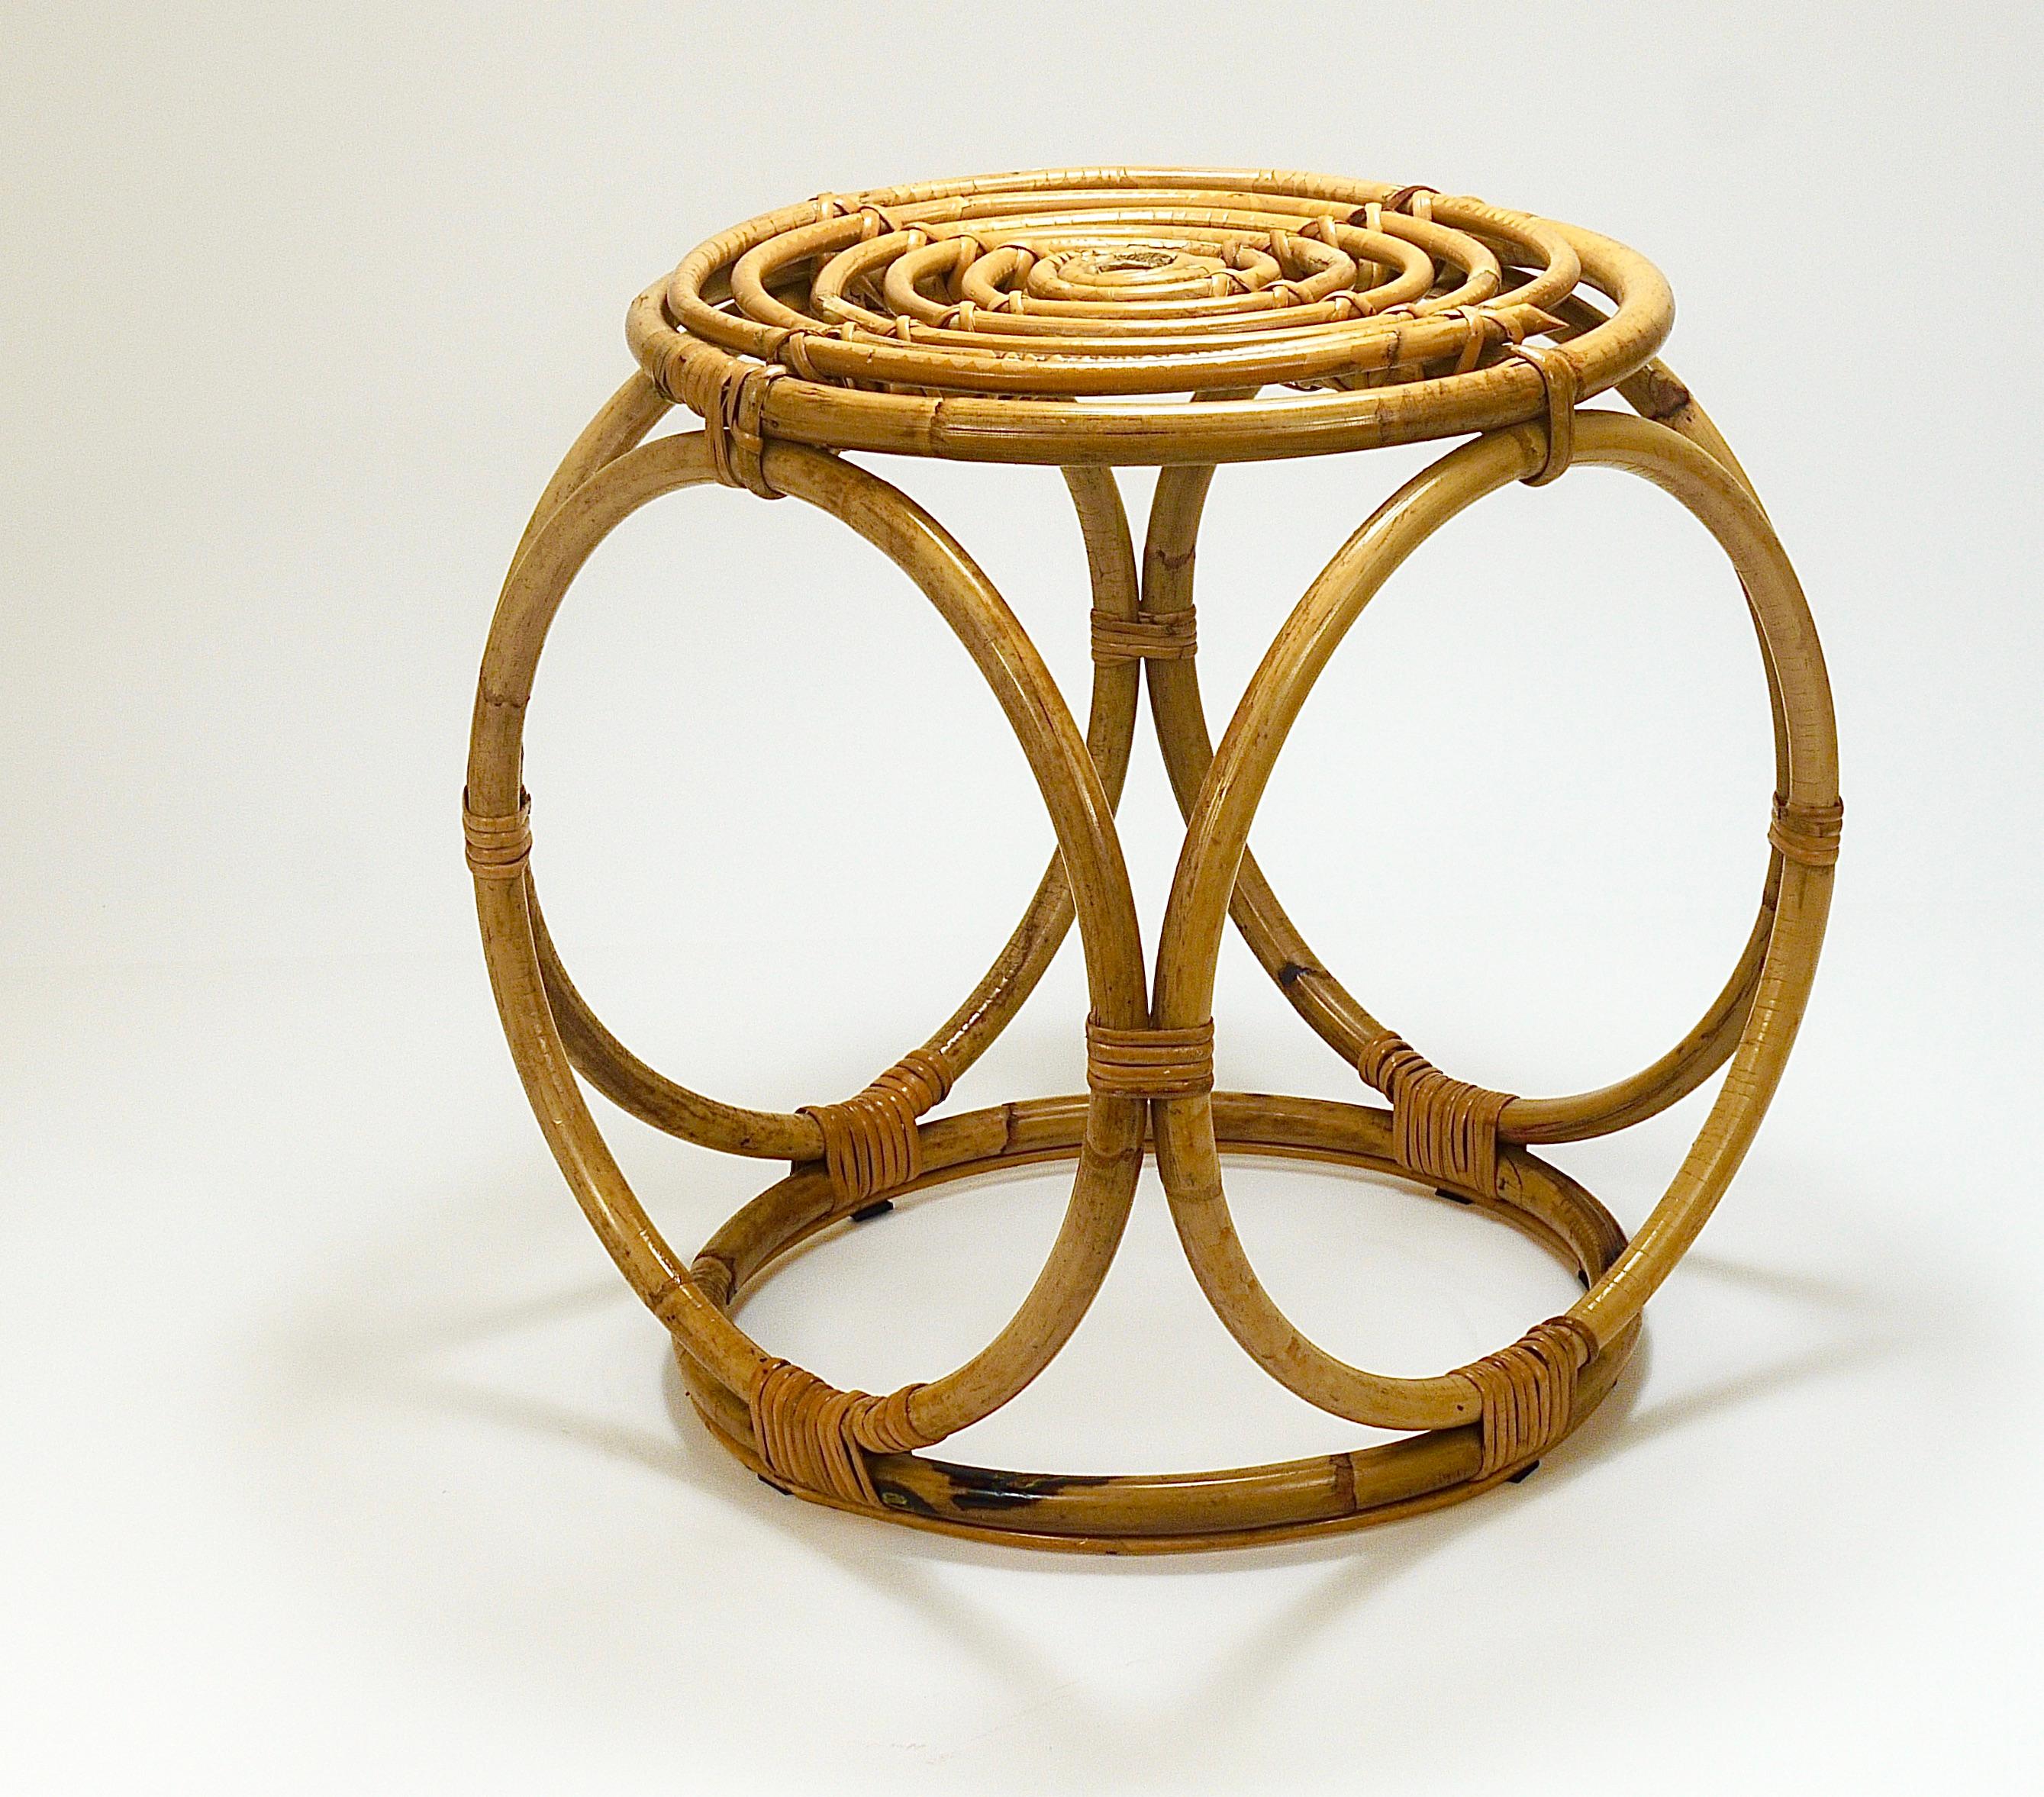 A chic French Riviera style midcentury modern cubic bamboo rattan stool or side table from the 1950s/1960s. Traditionally handmade of bamboo and rattan / cane / wicker. A decorative but versatile piece of furniture, which can be also used as an end